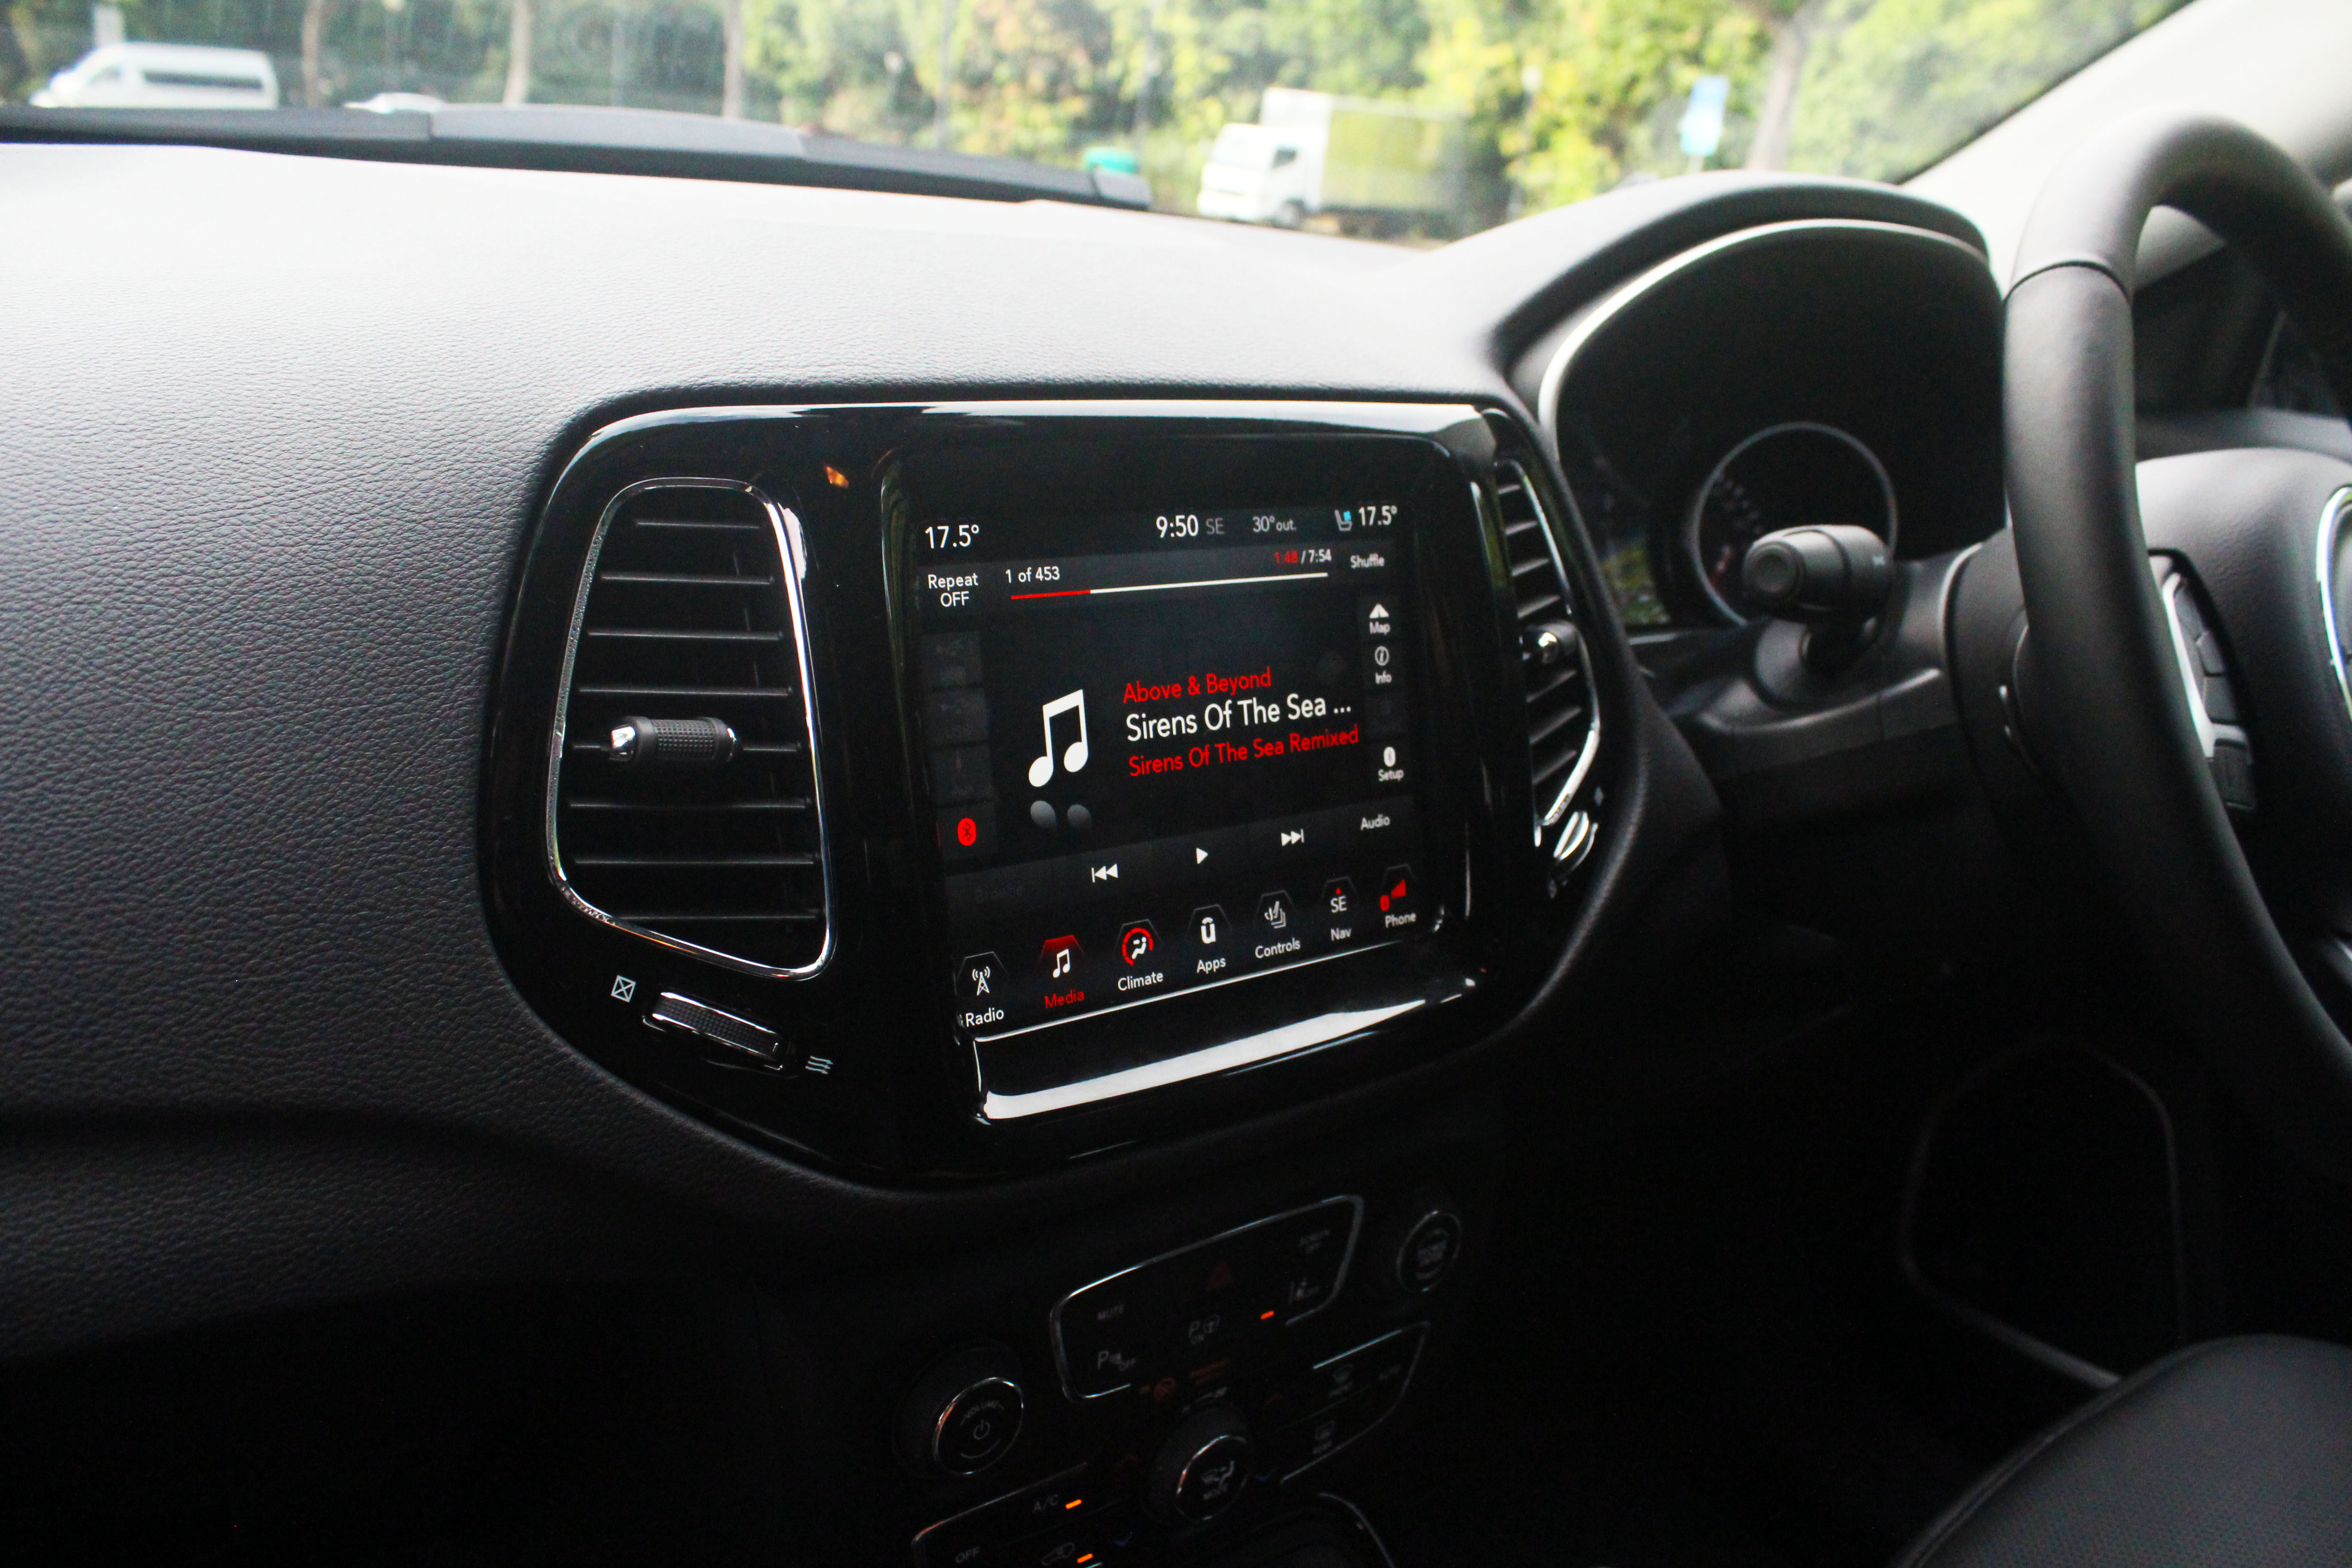 The brand new Jeep Compass Limited has many high end features